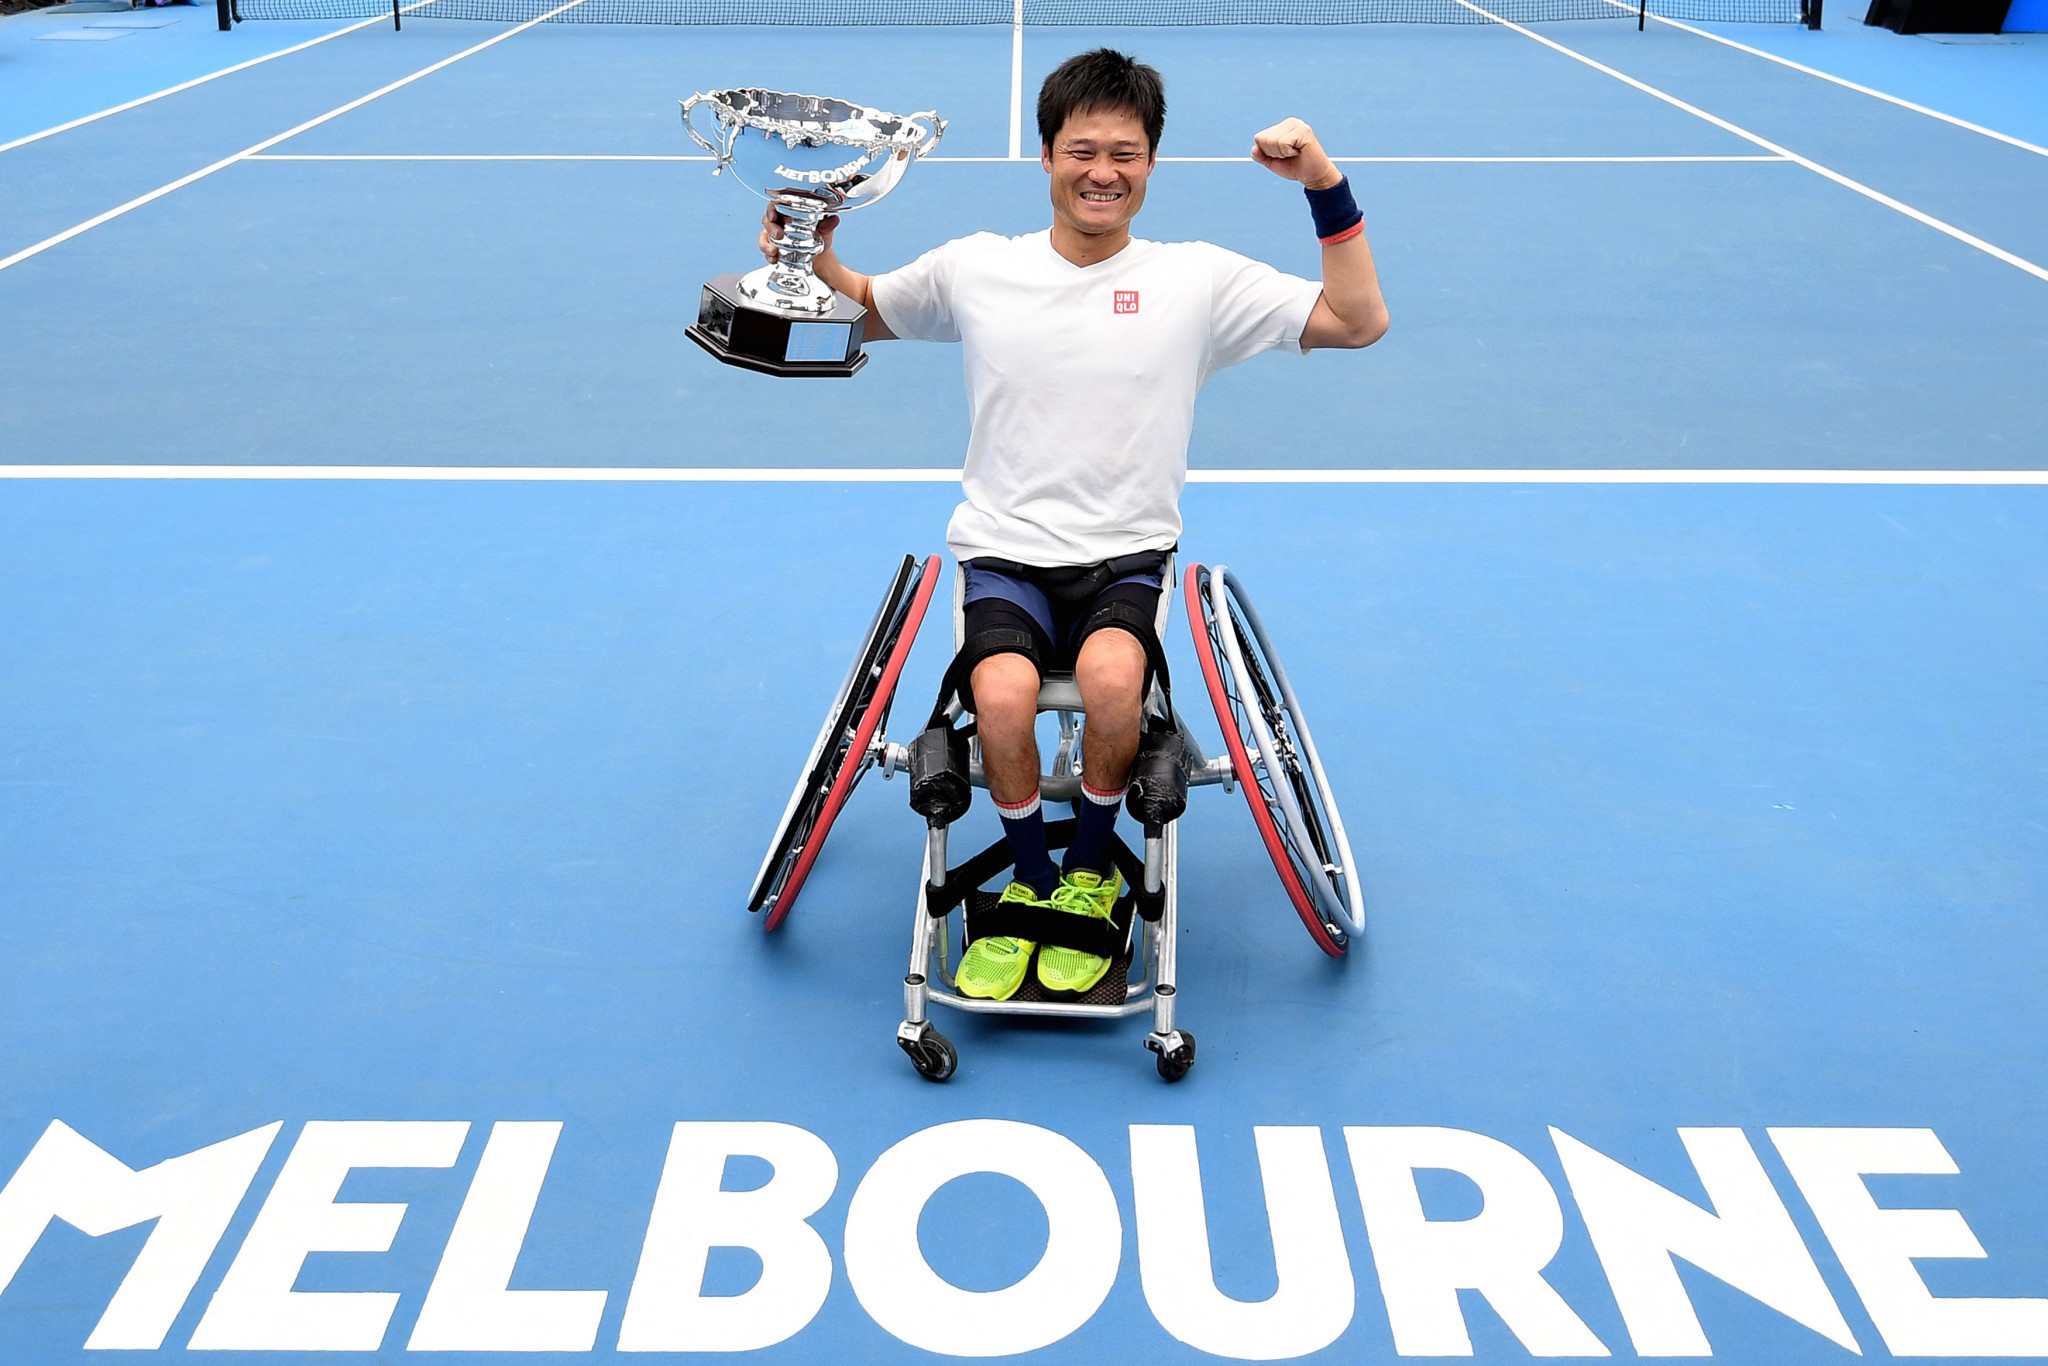 Shingo Kunieda equalled the record for Grand Slam titles by winning the Australian Open ©Getty Images